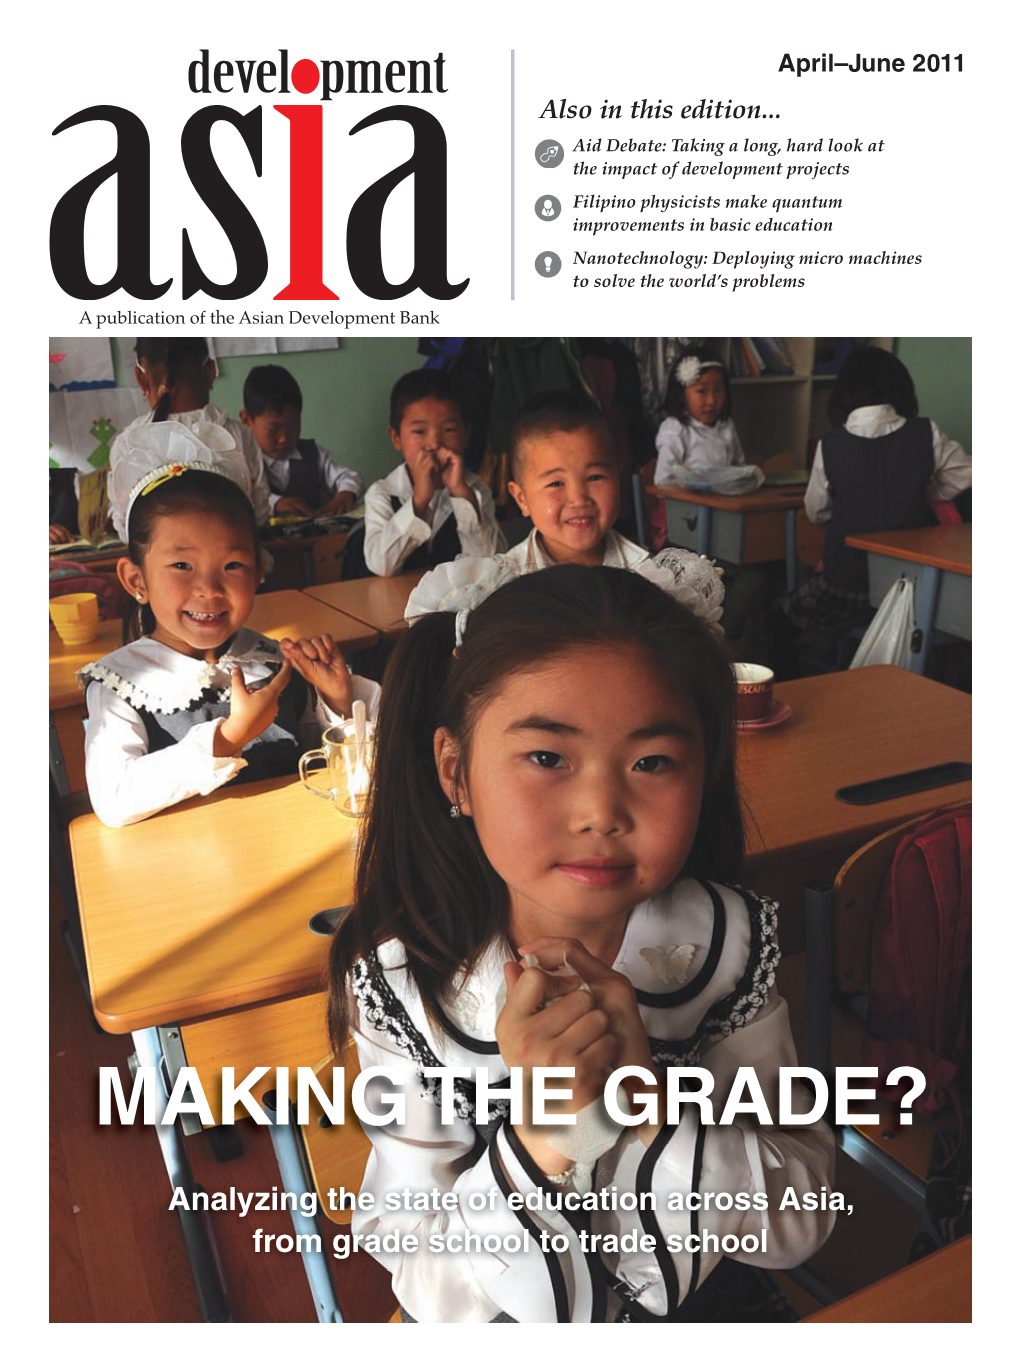 Analyzing the State of Education in Asia, from Grade School to Trade